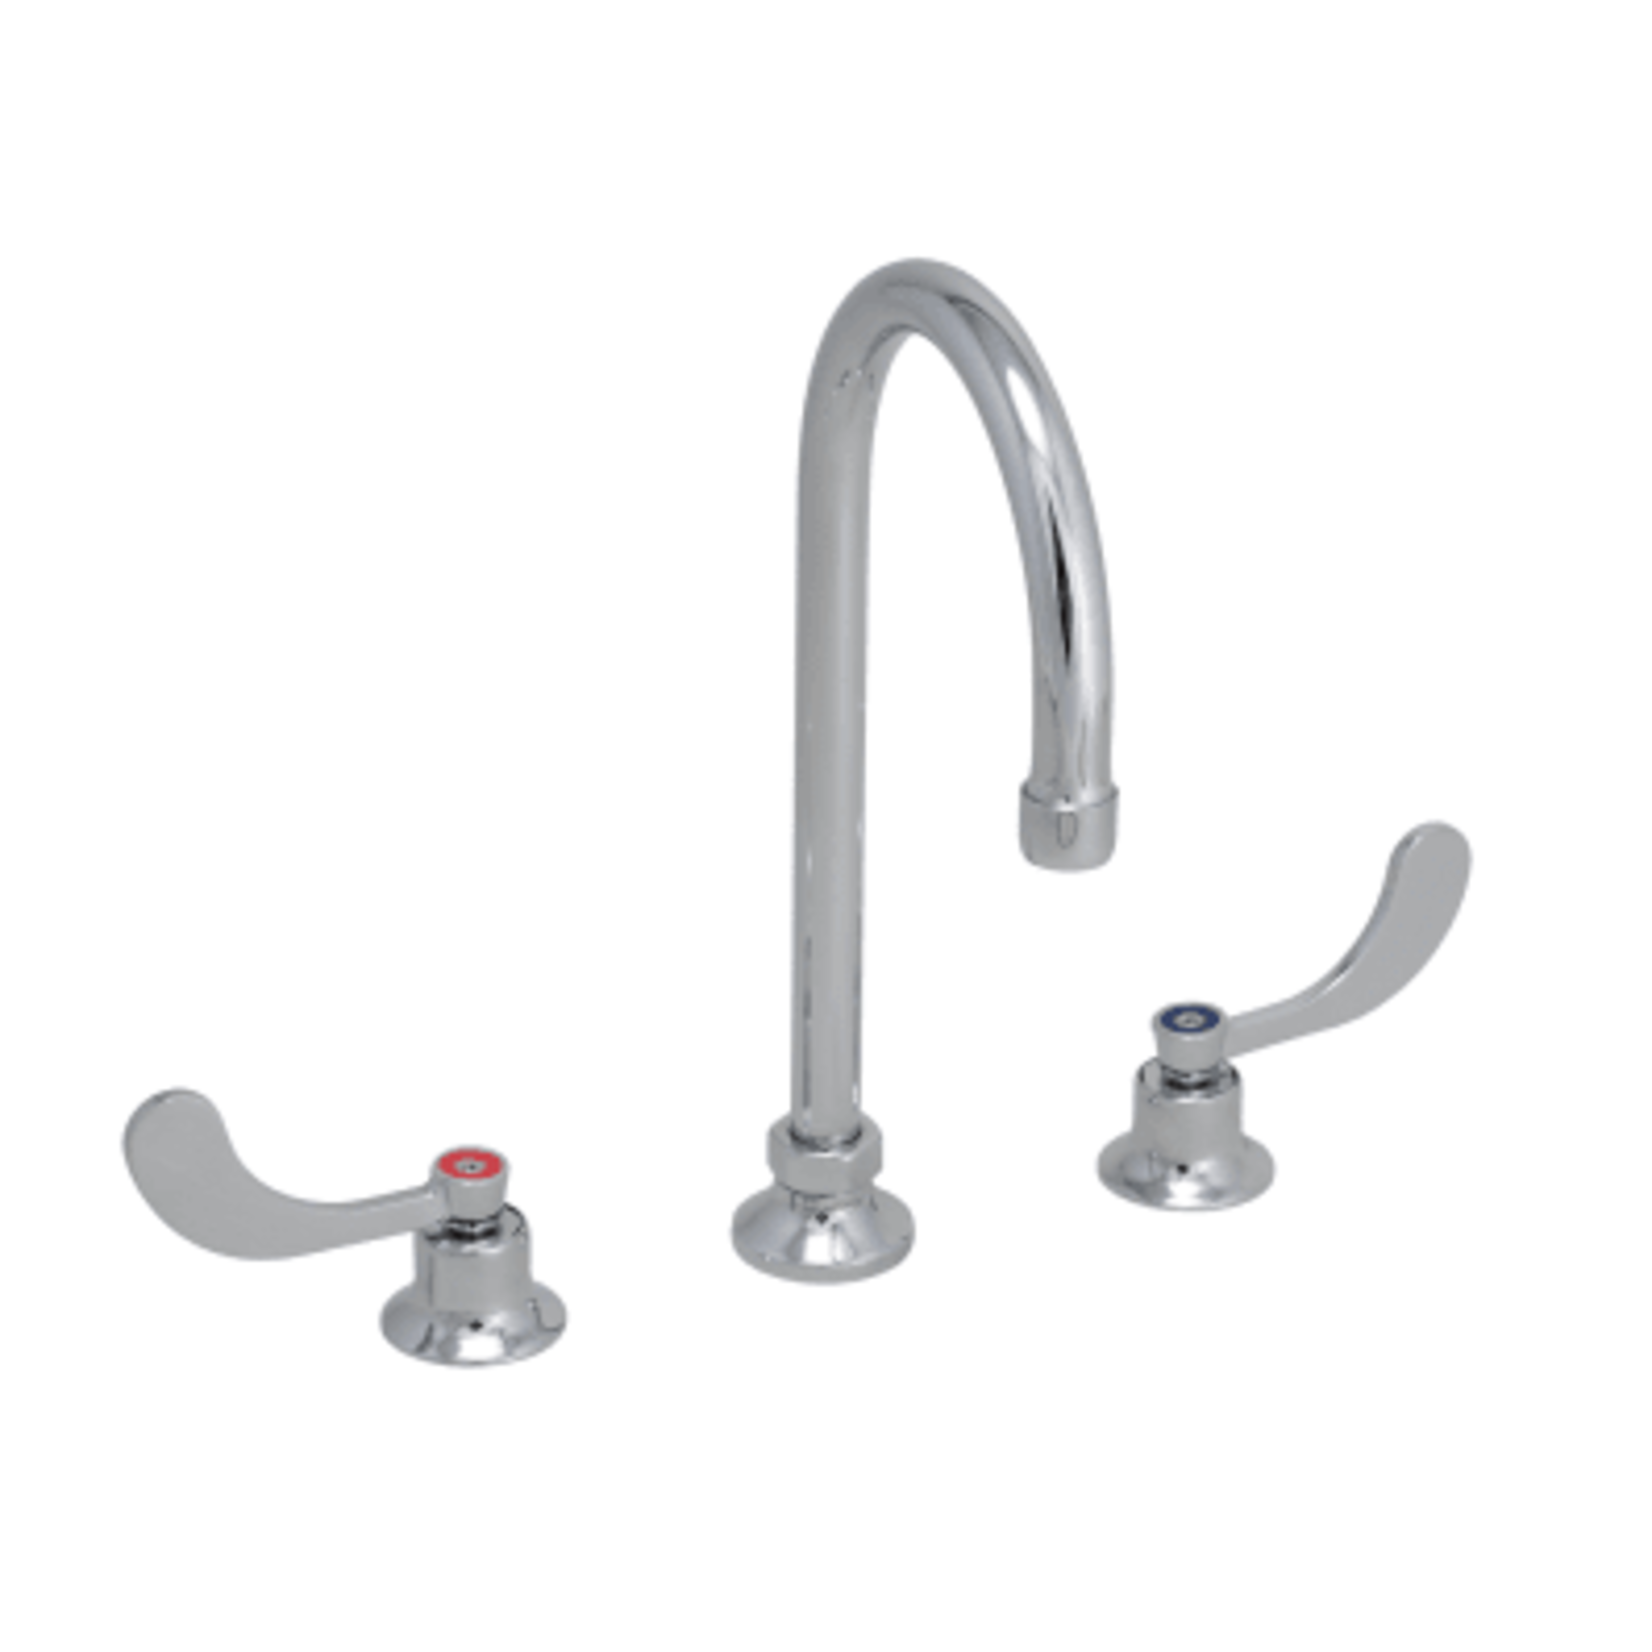 PROFLO 0.5 GPM WIDESPREAD BATHROOM FAUCET W/ WRIST BLADE HANDLES AND COLOR INDEXED CAPS